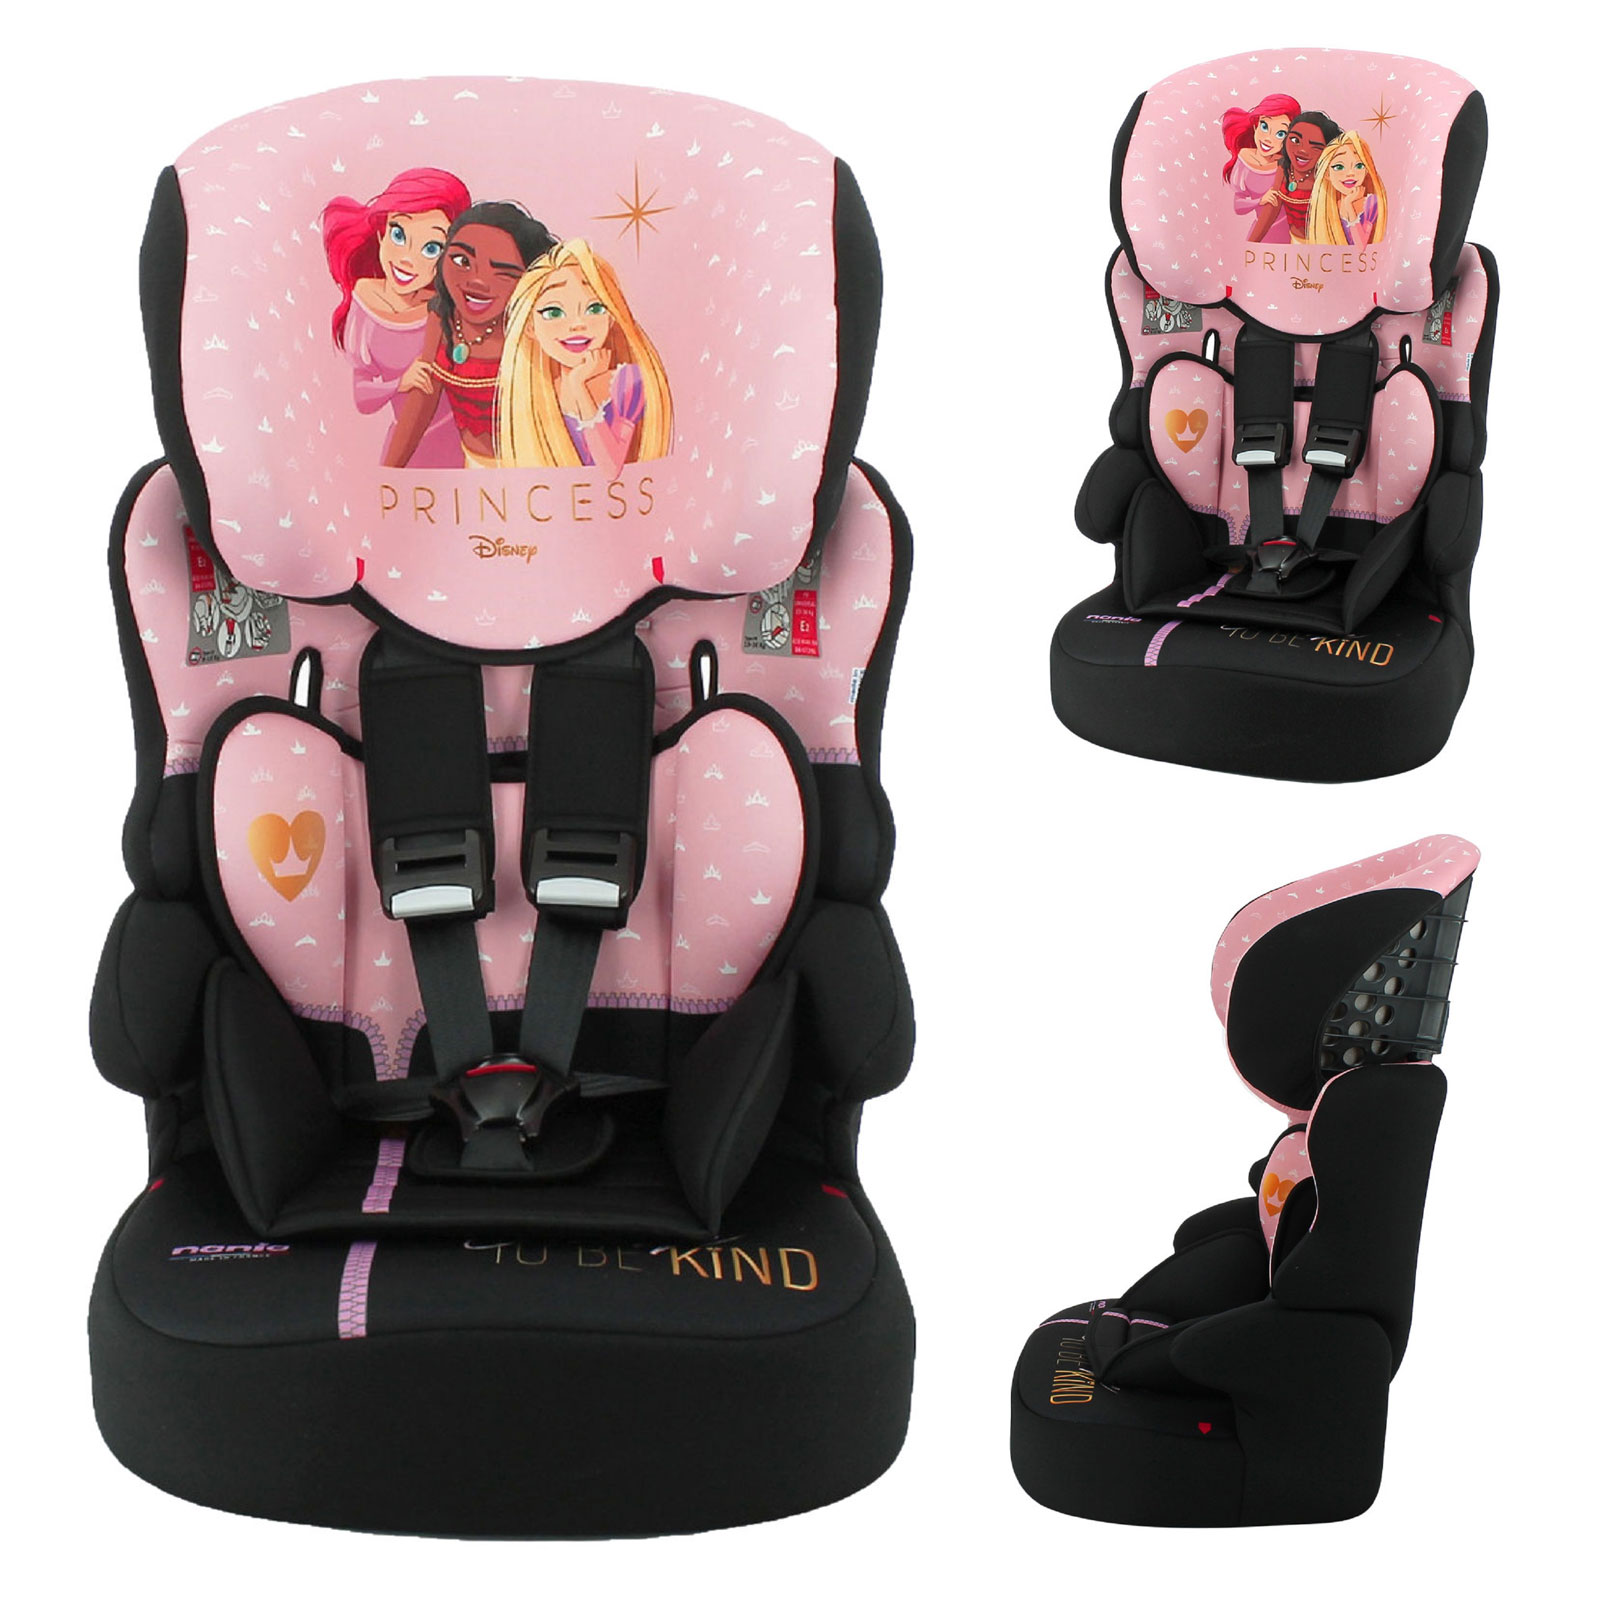 Disney Princess Linton Comfort Plus Luxe Group 123 Car Seat - Pink (9 Months-12 Years)